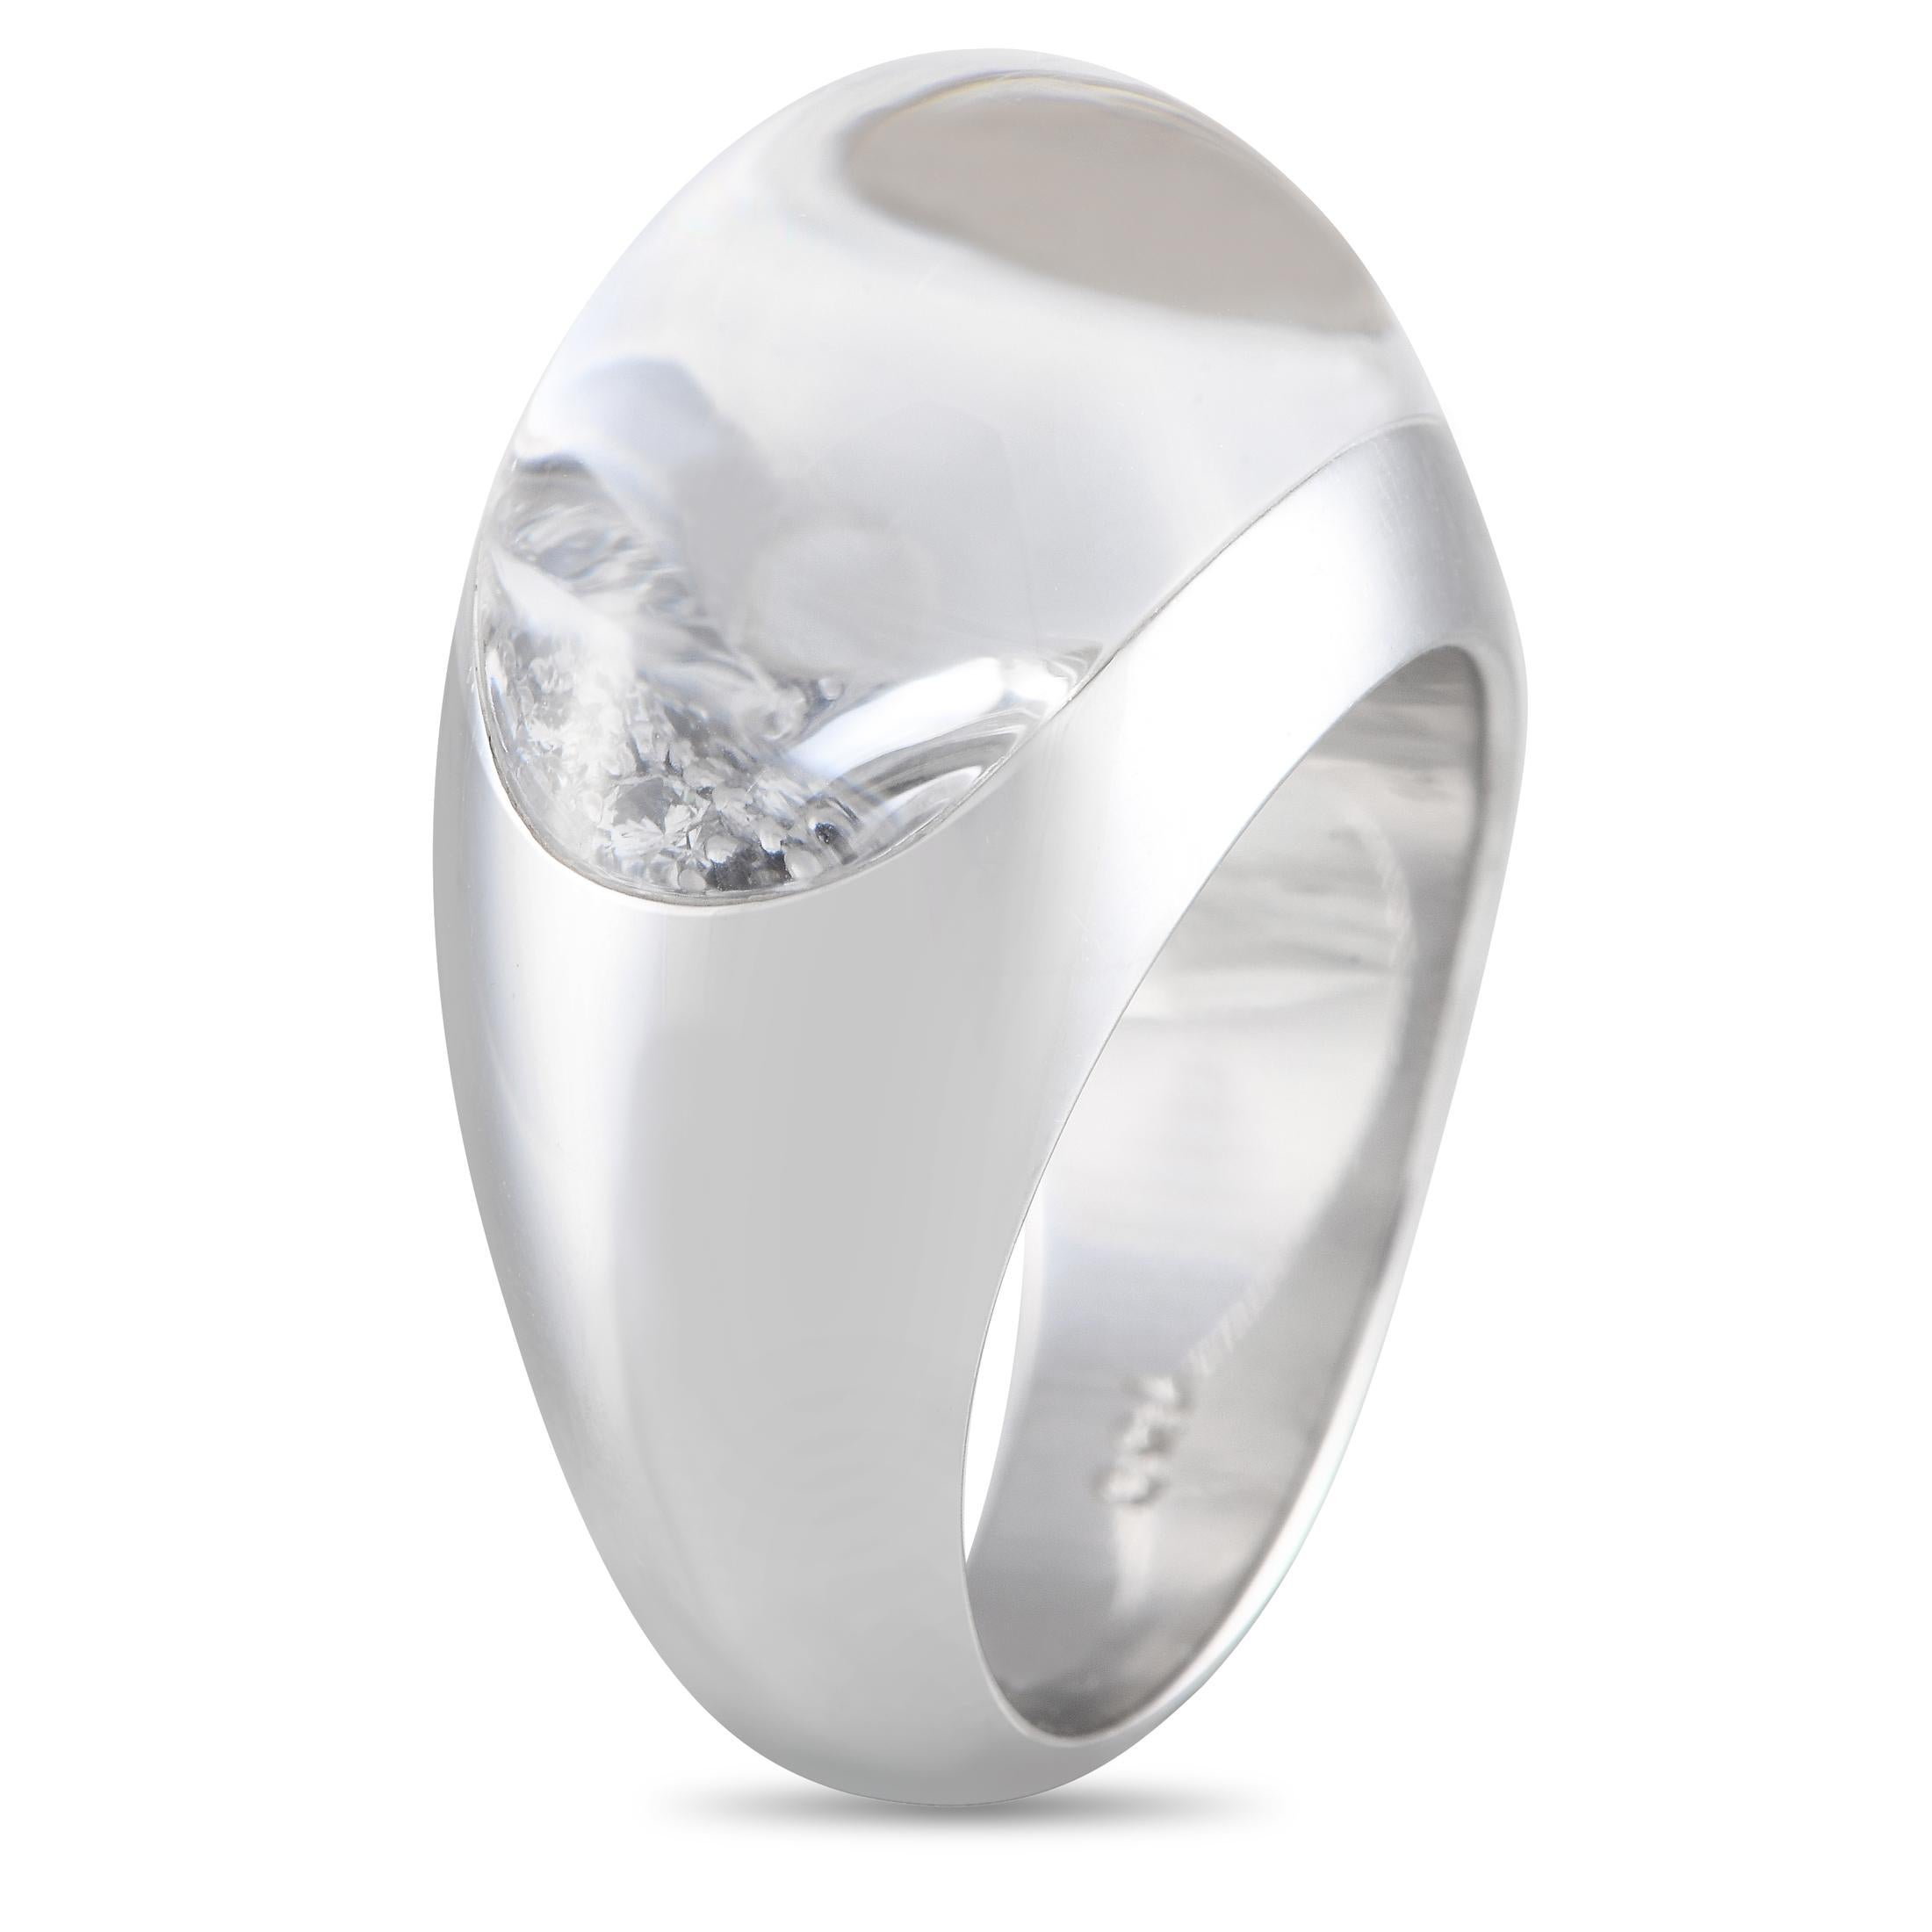 On this 18K white gold Cartier ring, a beautifully rounded rock crystal magnifies the 1.0 carats of sparkling diamonds accenting the center of the design. This piece features a 6mm wide band and a top height measuring 9mm.This jewelry piece is